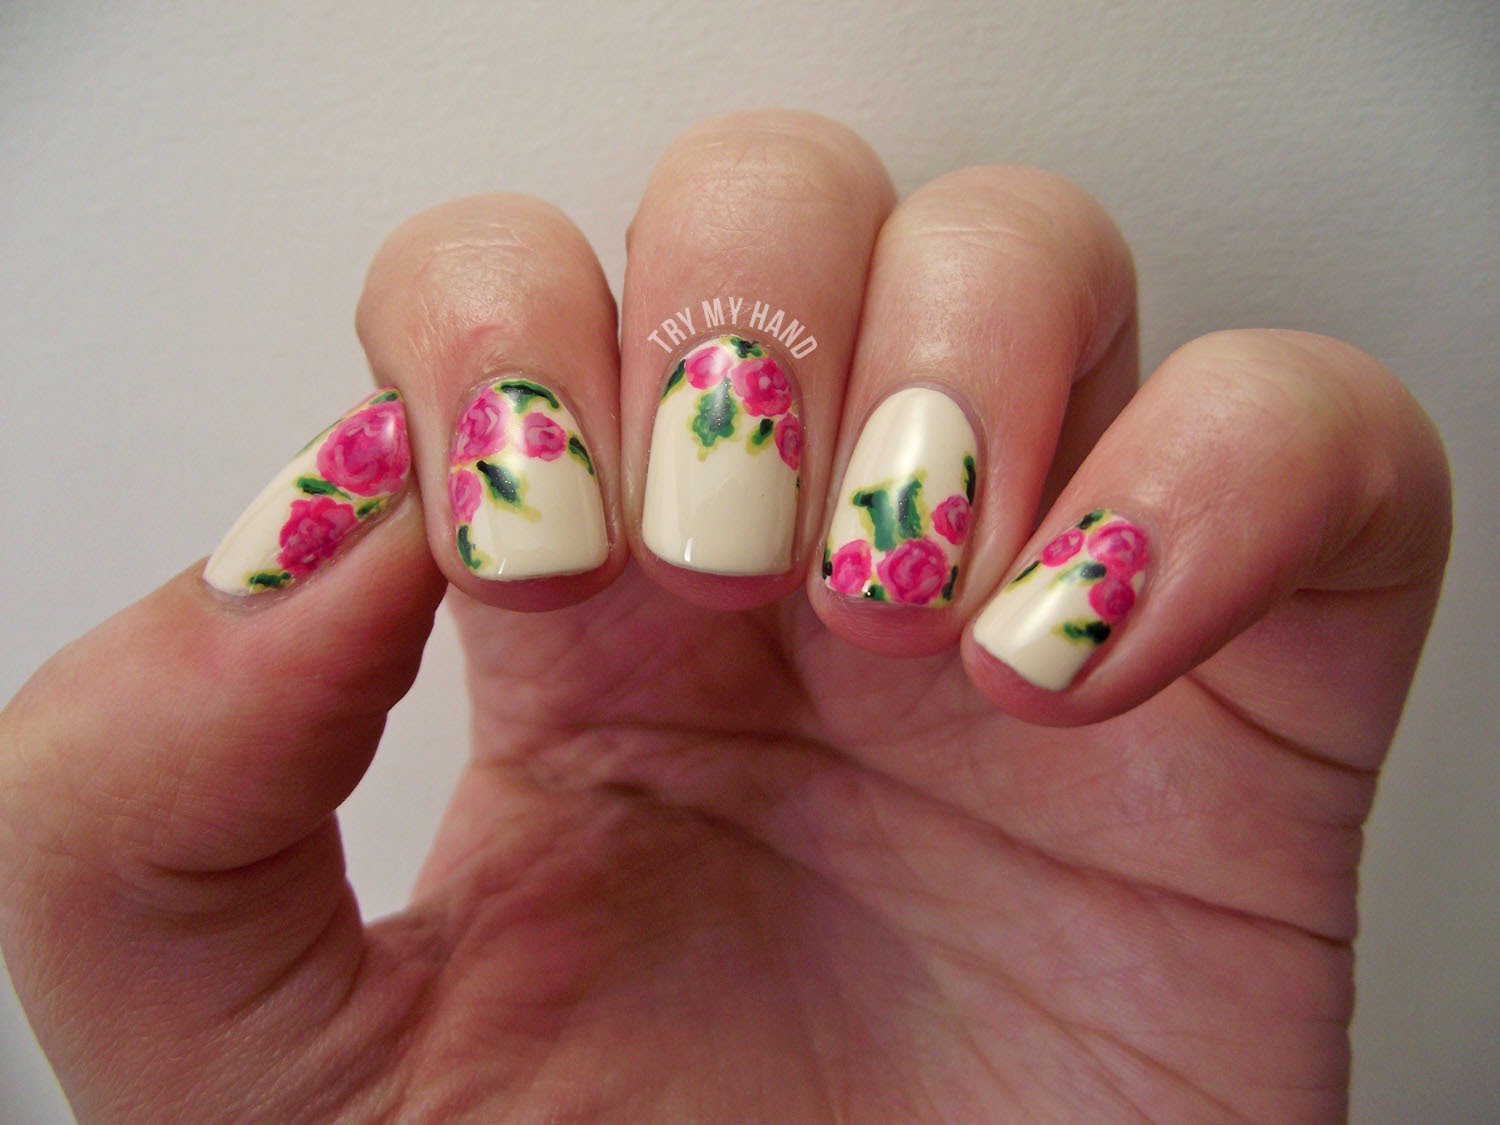 2. Simple Floral Nail Art Tutorial - wide 4